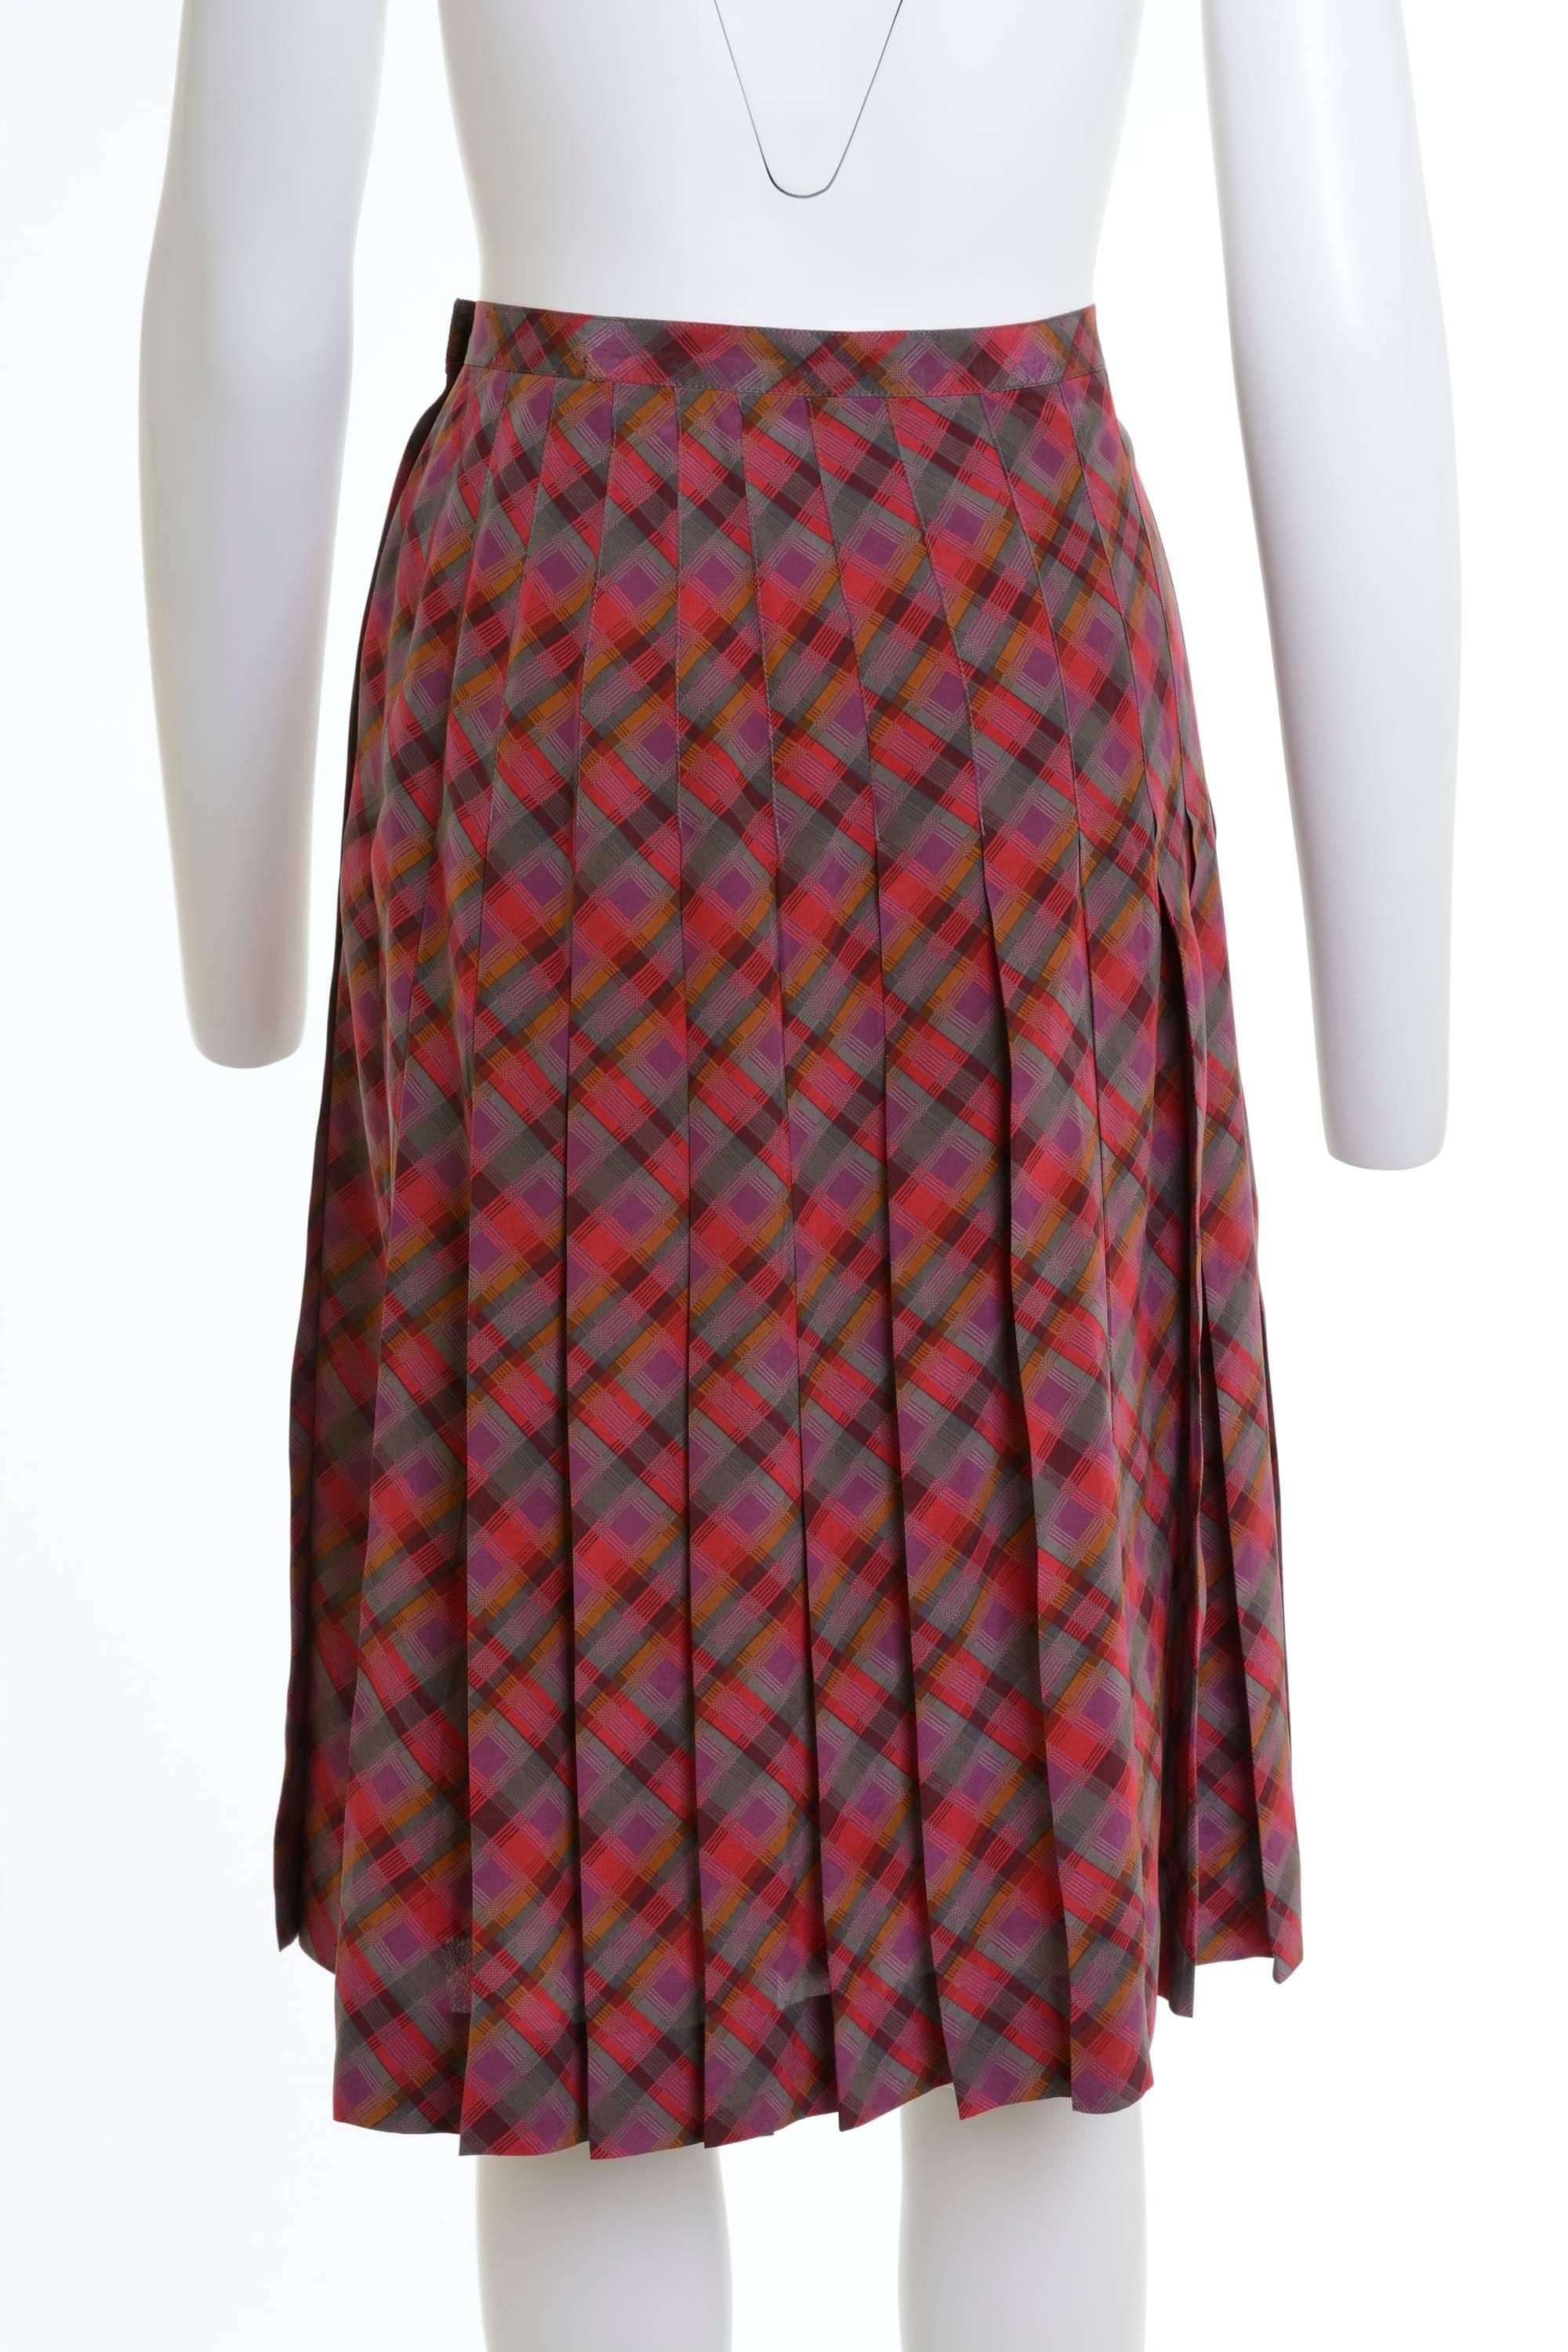 1980s Yves Saint Laurent Rive Gauche pleateds wrap skirt in abstract silk fabric, slide hook closure, made in France.

Excellent Vintage Condition 

Label: Yves Saint Laurent Rive Gauche
Fabric: Silk
Colour: purple/ red/ green/ grey/